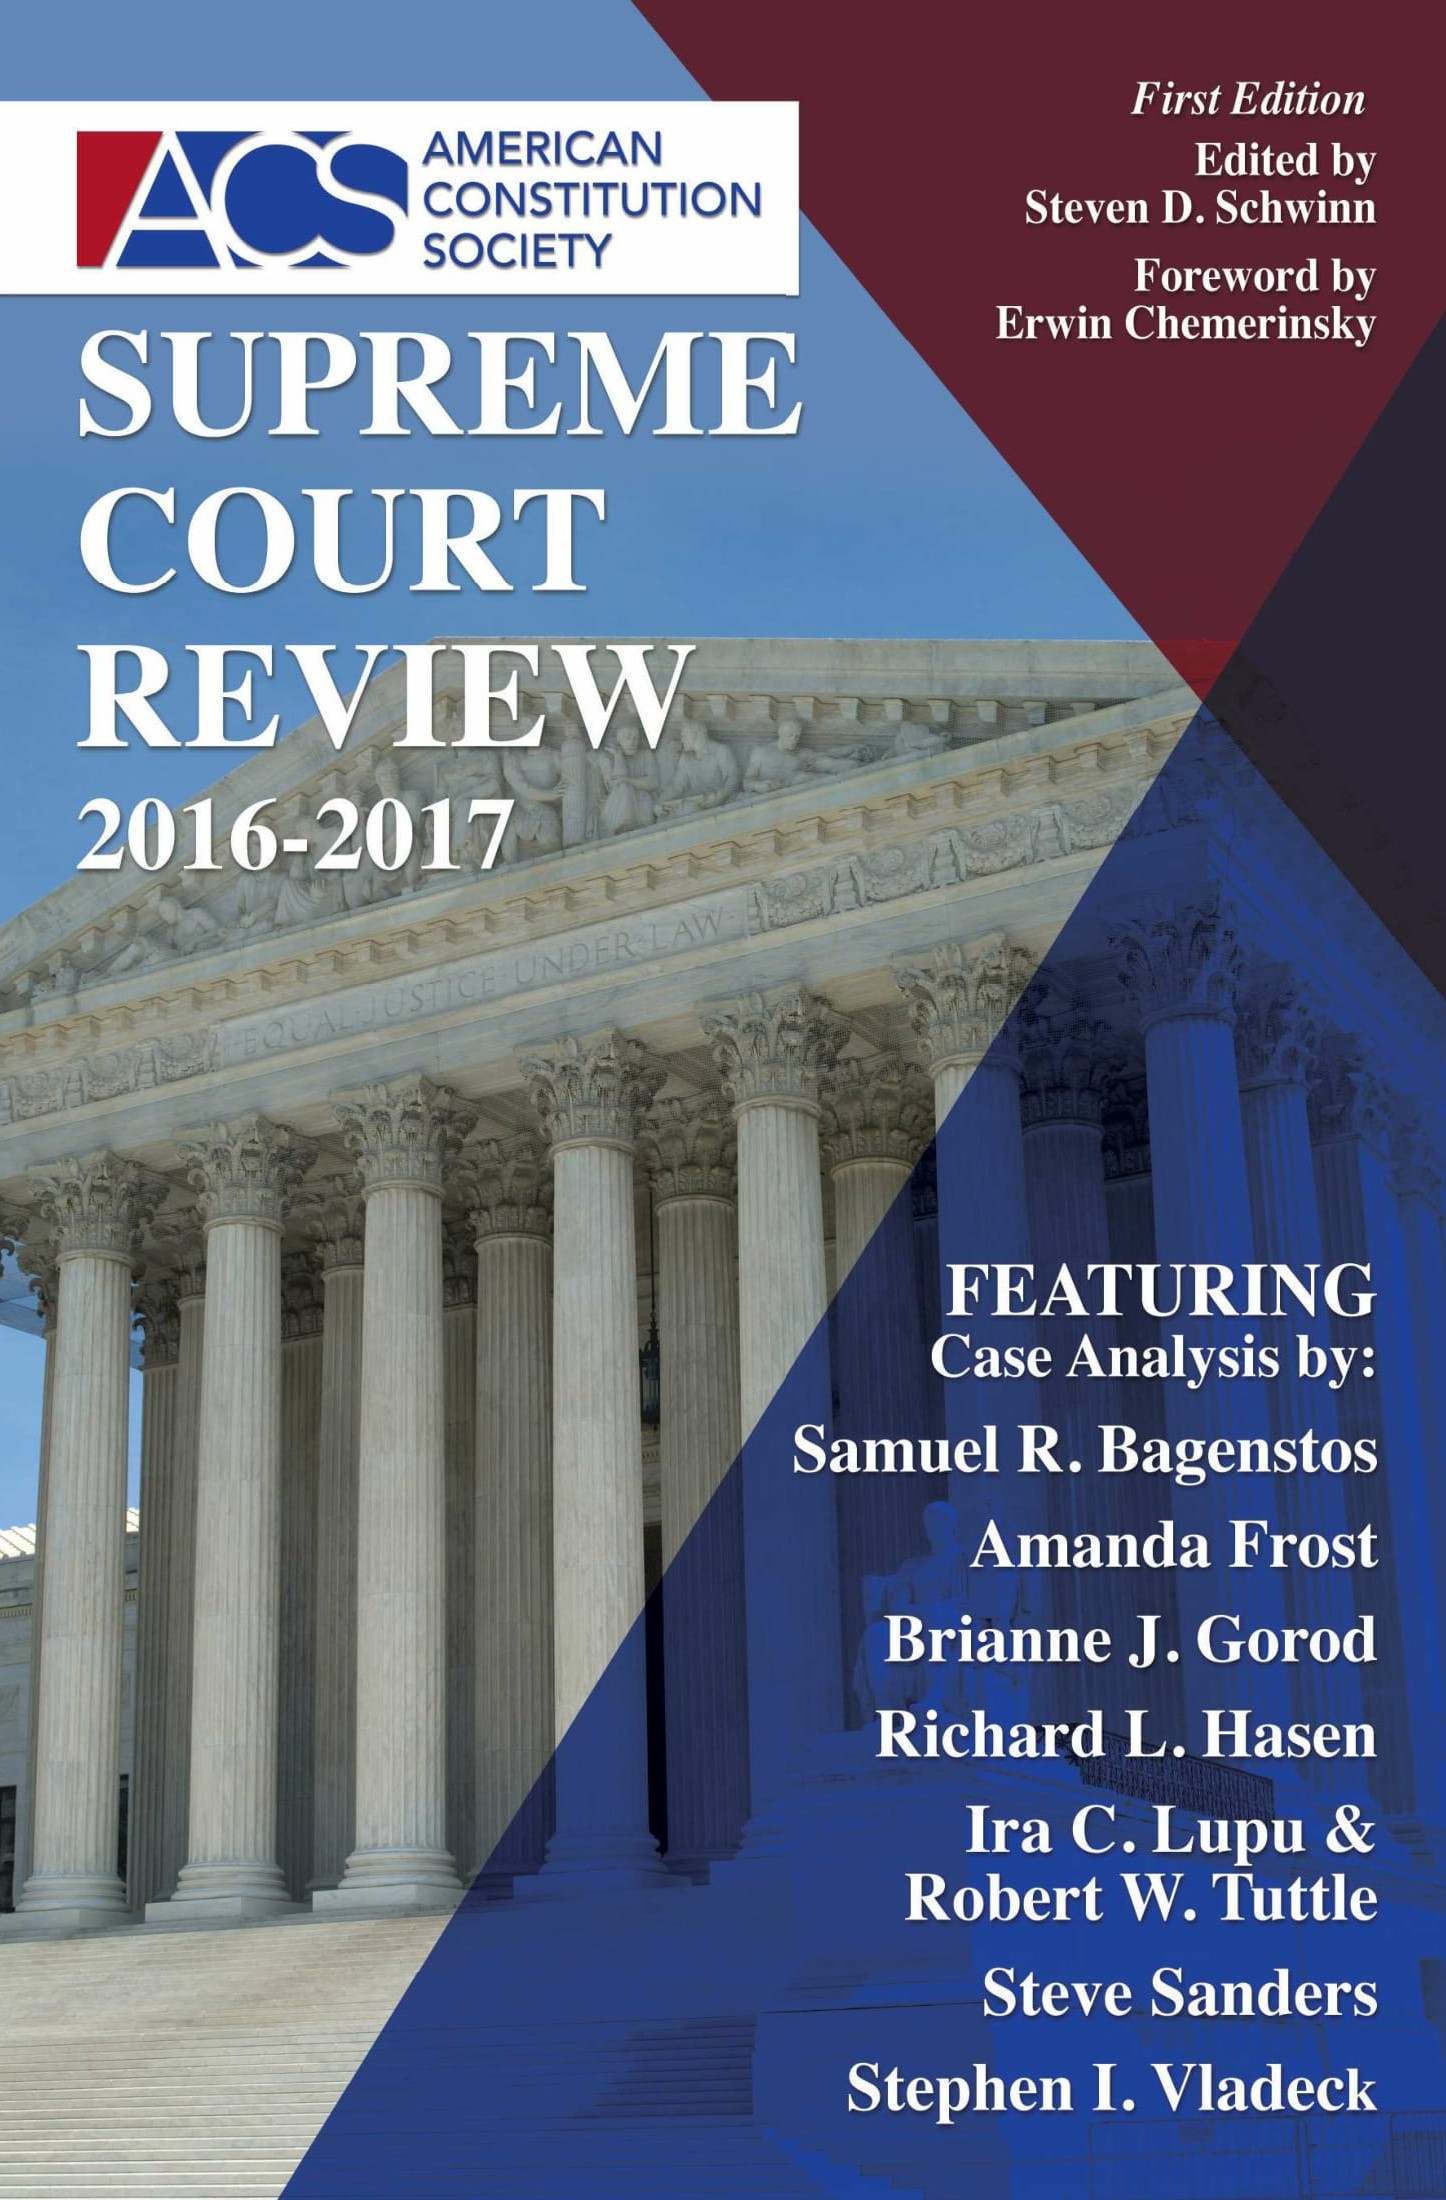 ACS_Supreme_Court_Review_16-17_front_page-1.jpg